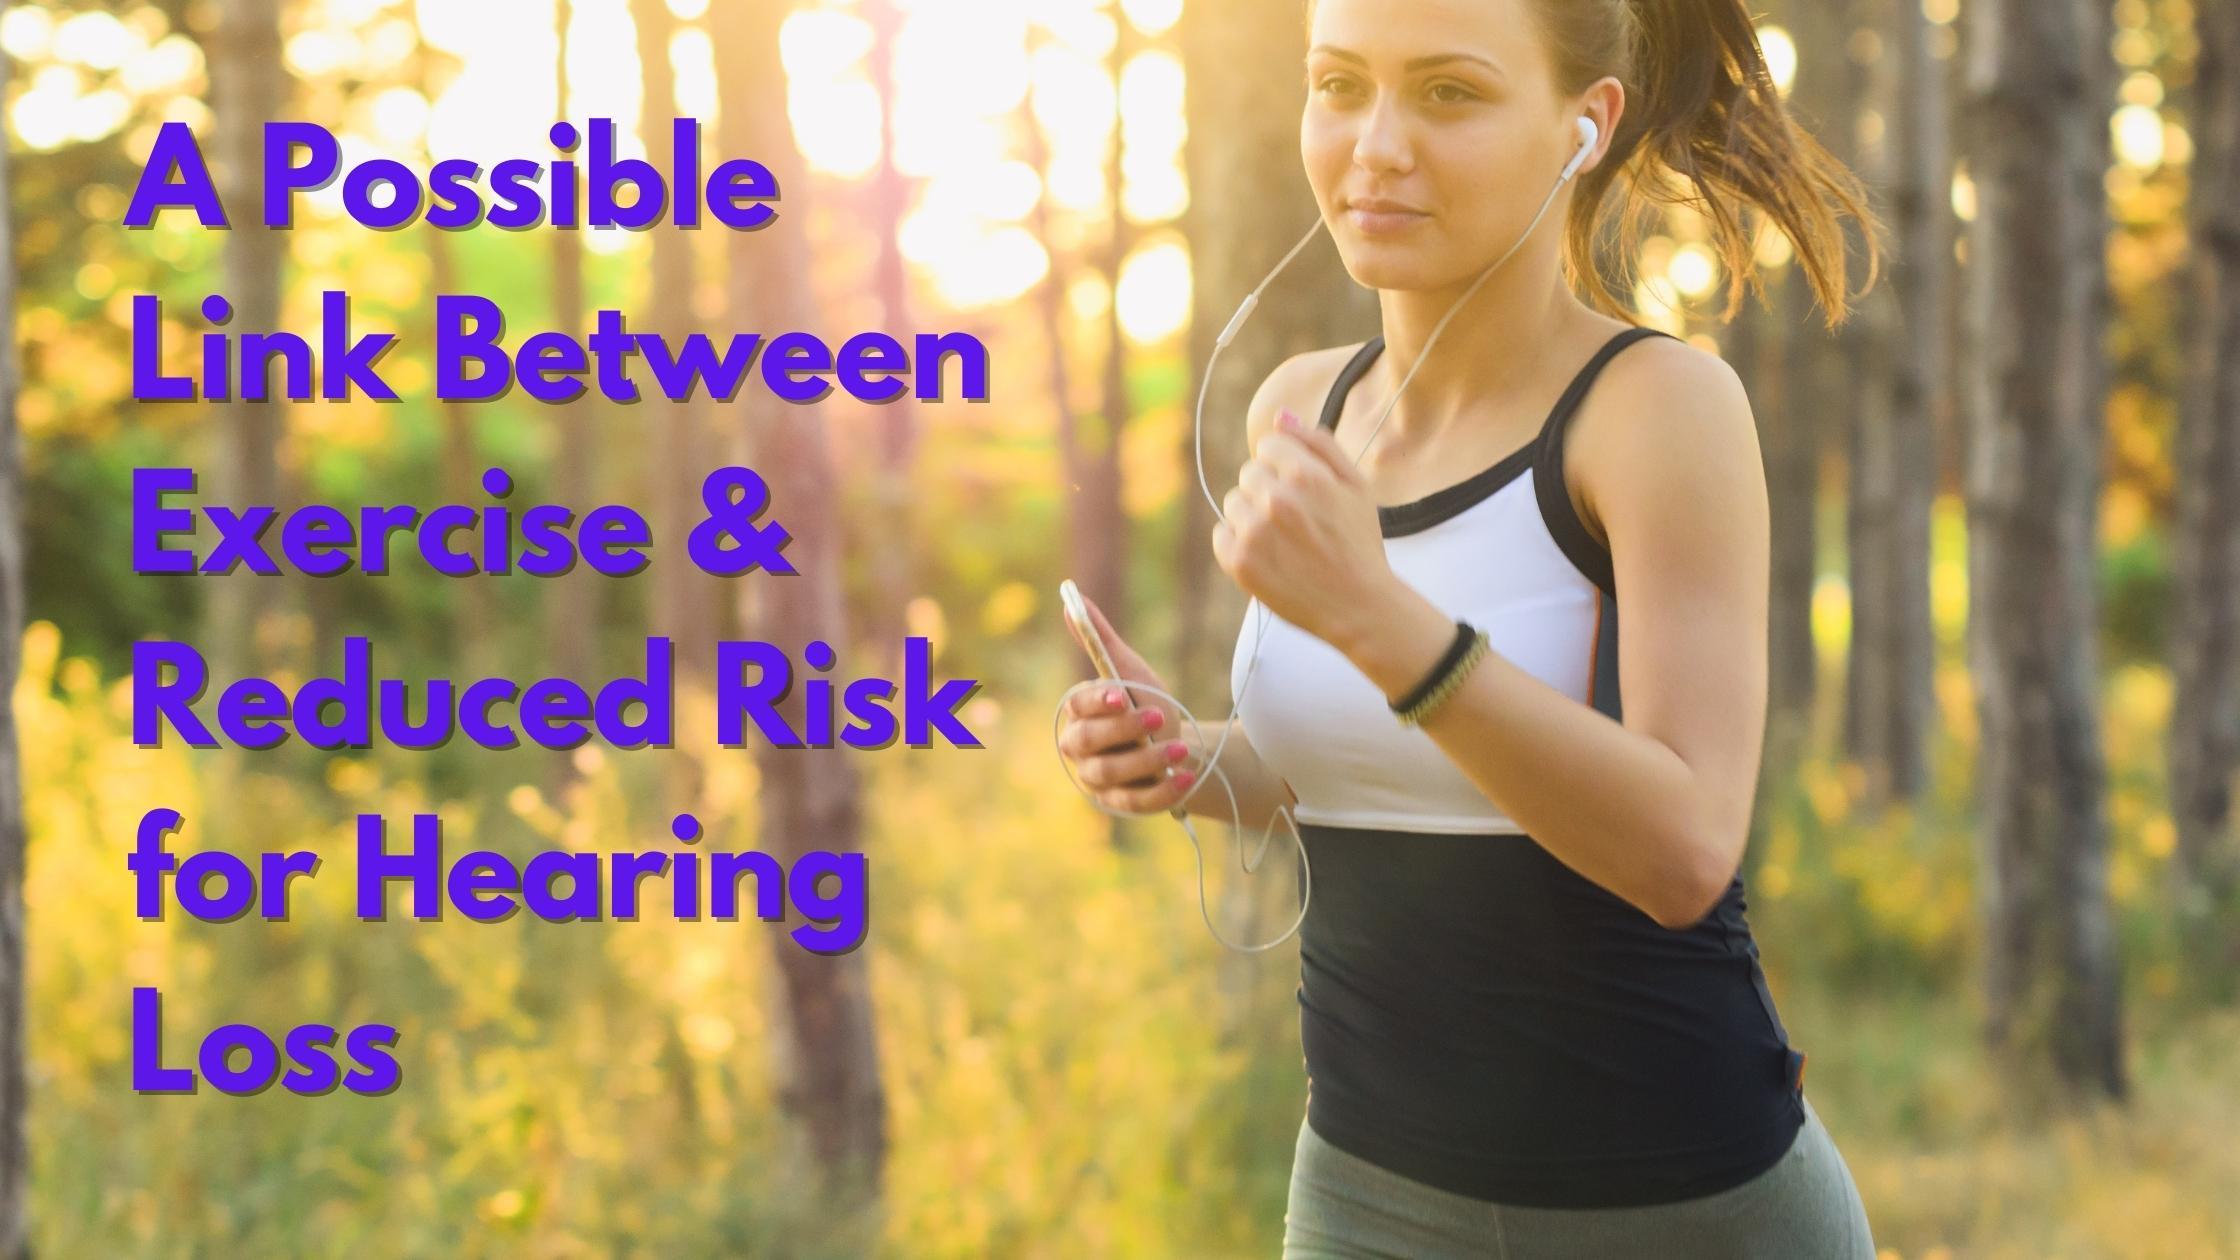 Featured image for “A Possible Link Between Exercise & Reduced Risk for Hearing Loss”